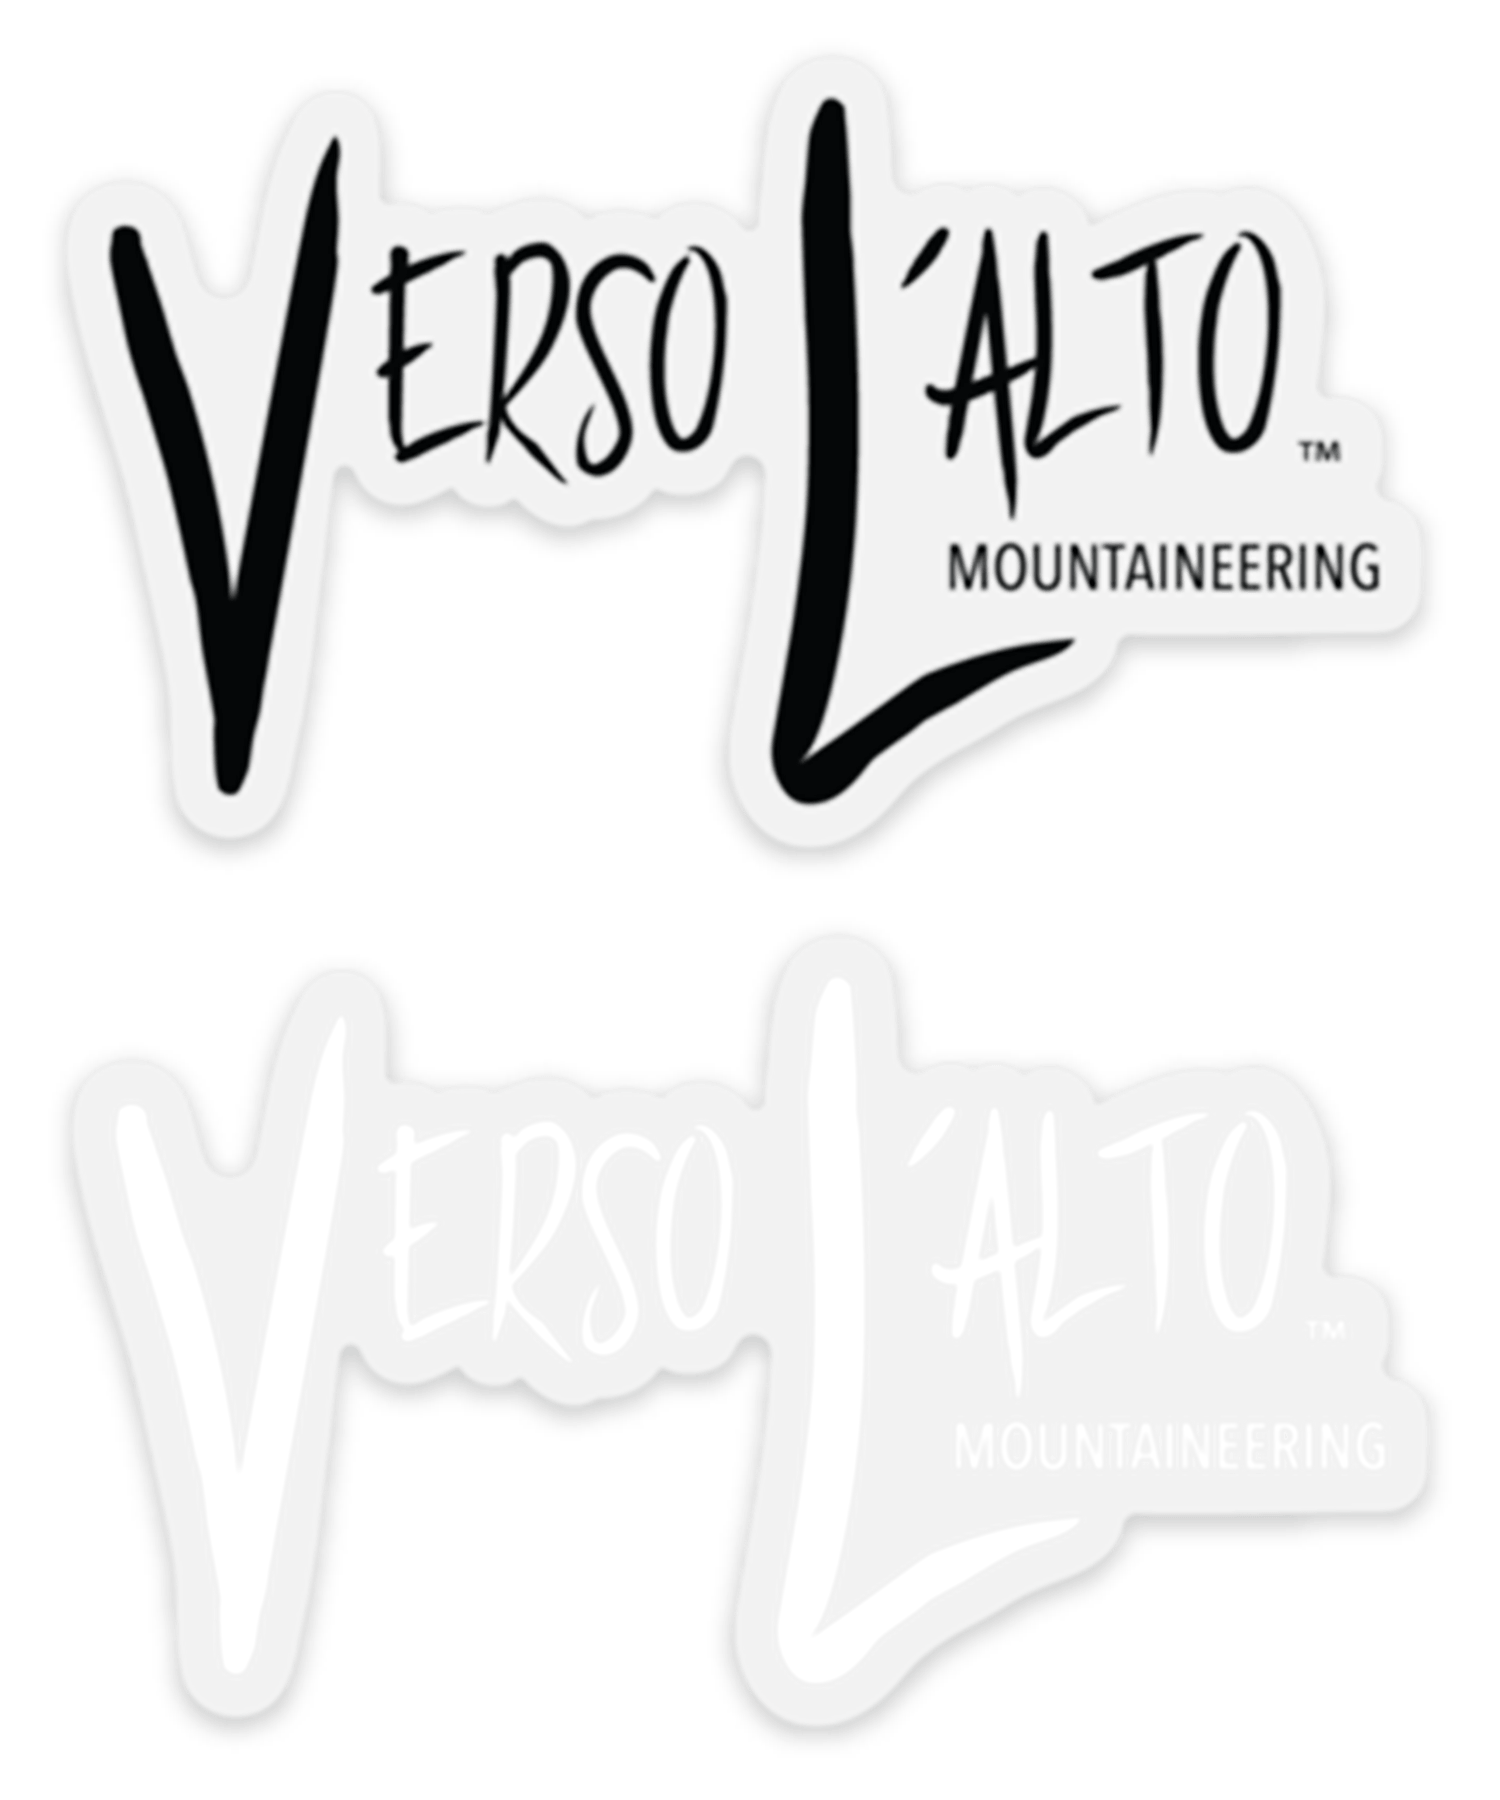 Brand with VL Logo - Verso L'Alto Mountaineering Logo Sticker Pack – VL Mountaineering™